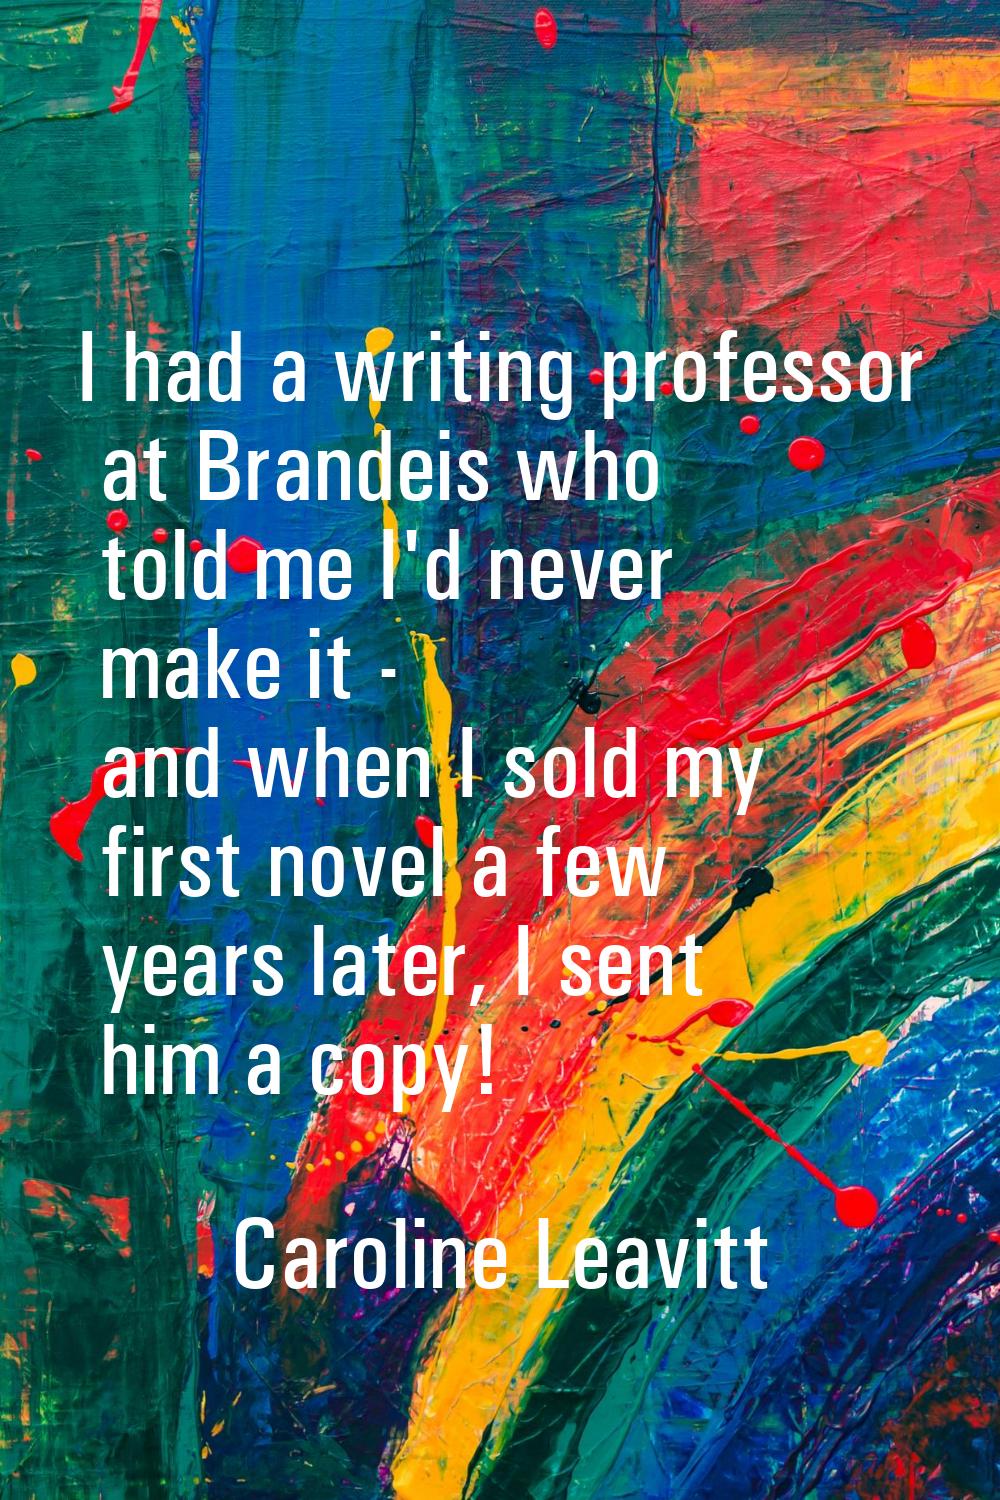 I had a writing professor at Brandeis who told me I'd never make it - and when I sold my first nove